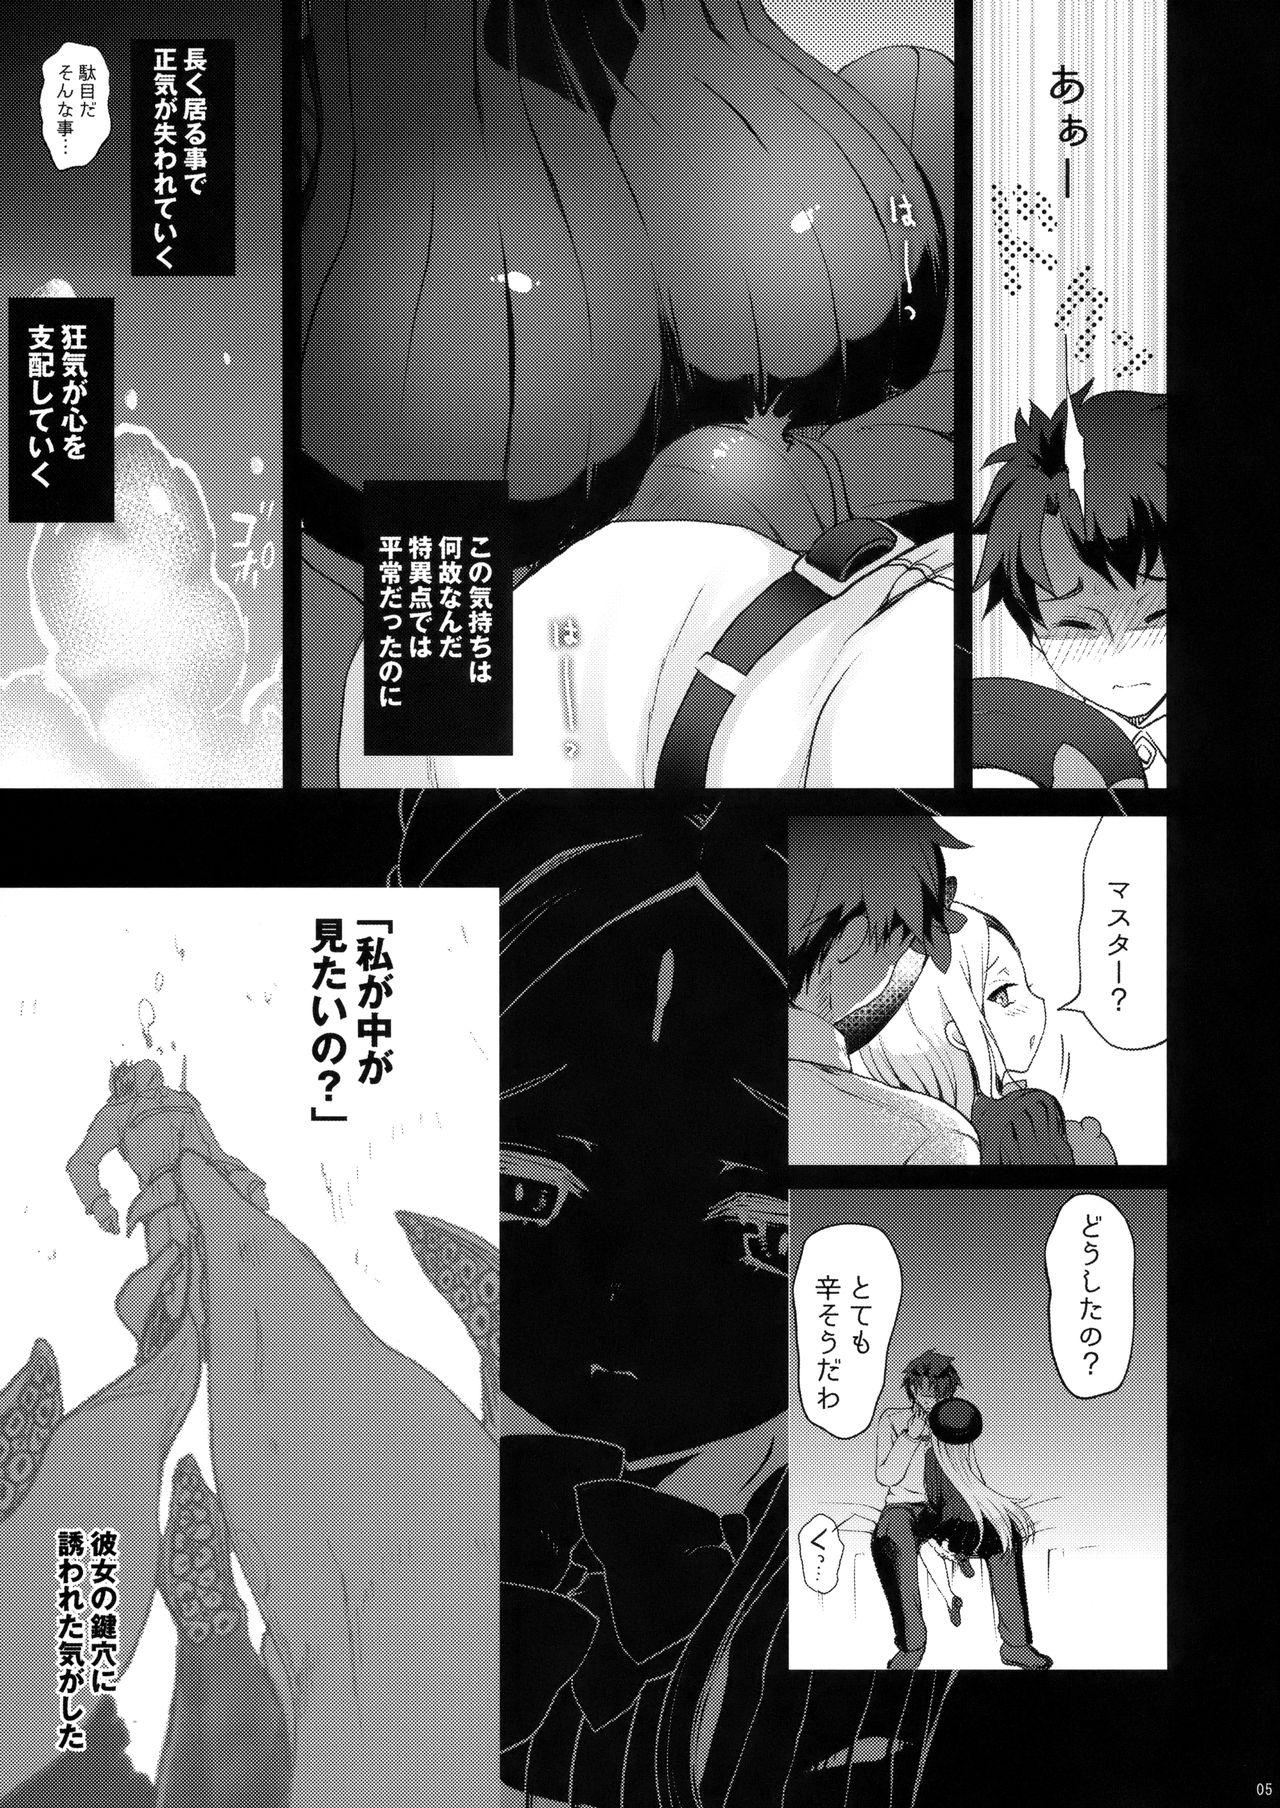 Stripping Abigail to Himitsu no Kagiana - Fate grand order Classy - Page 4